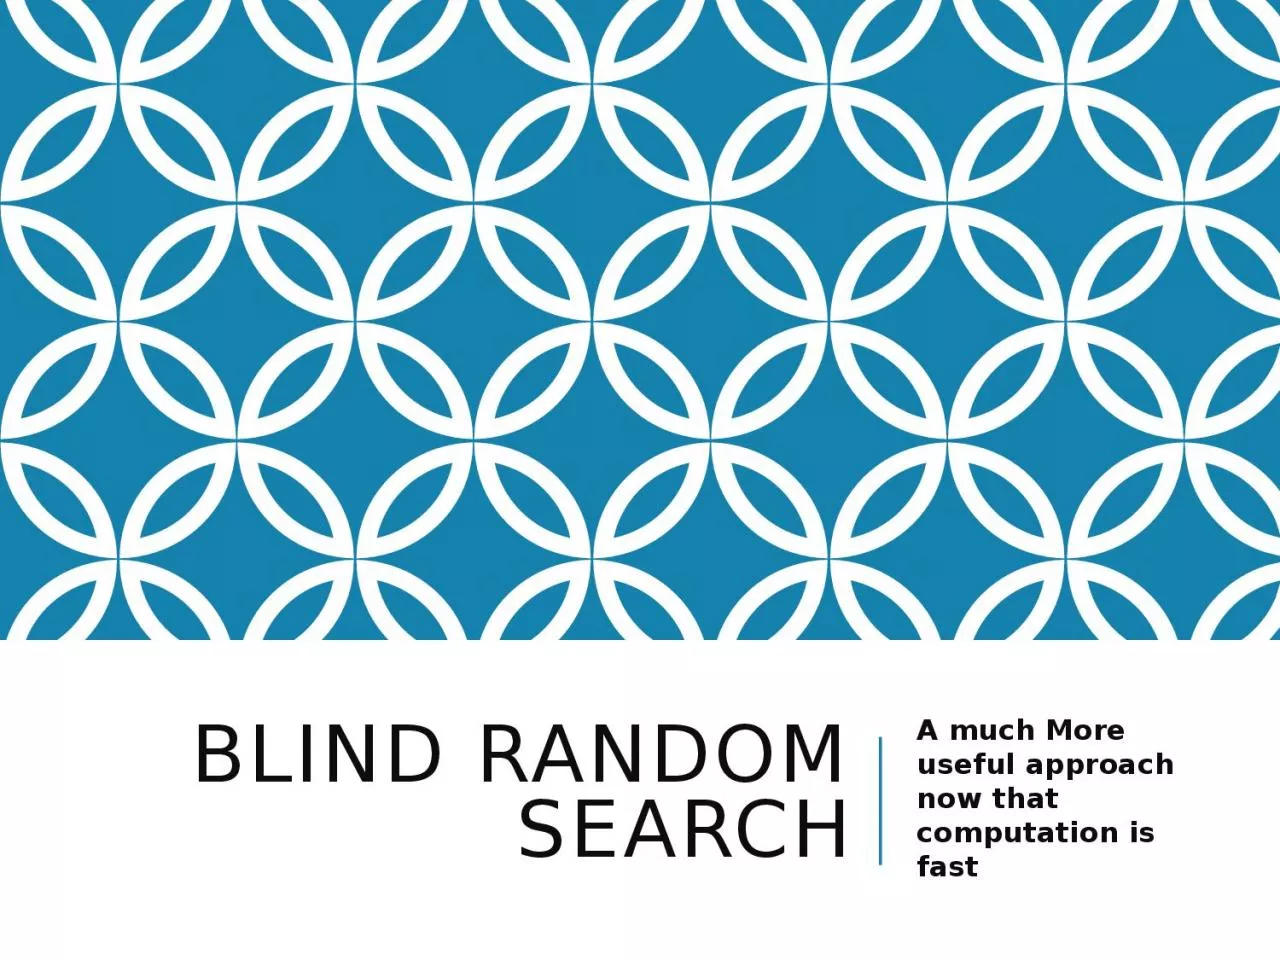 Blind Random Search A much More useful approach now that computation is fast